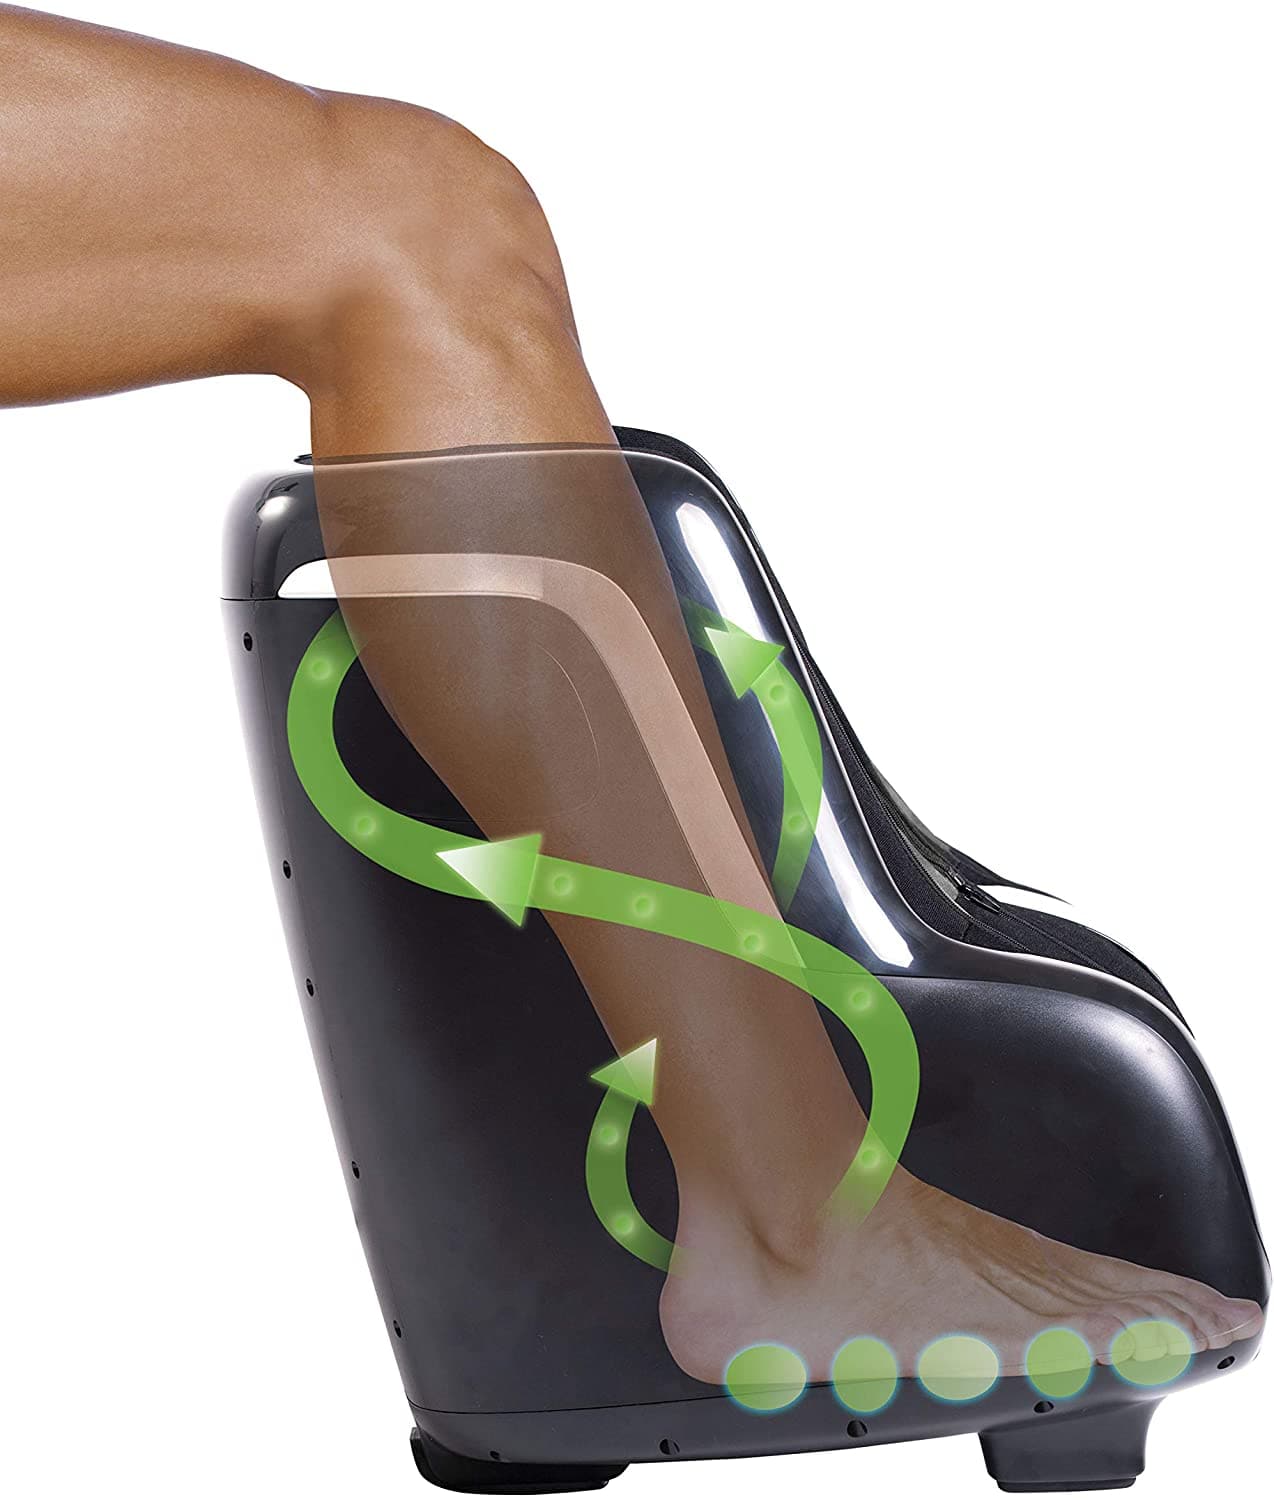 Human Touch Reflex5s Foot and Calf Massager - Perfect for Relaxation and Stress Relief - Senior.com Foot Massagers